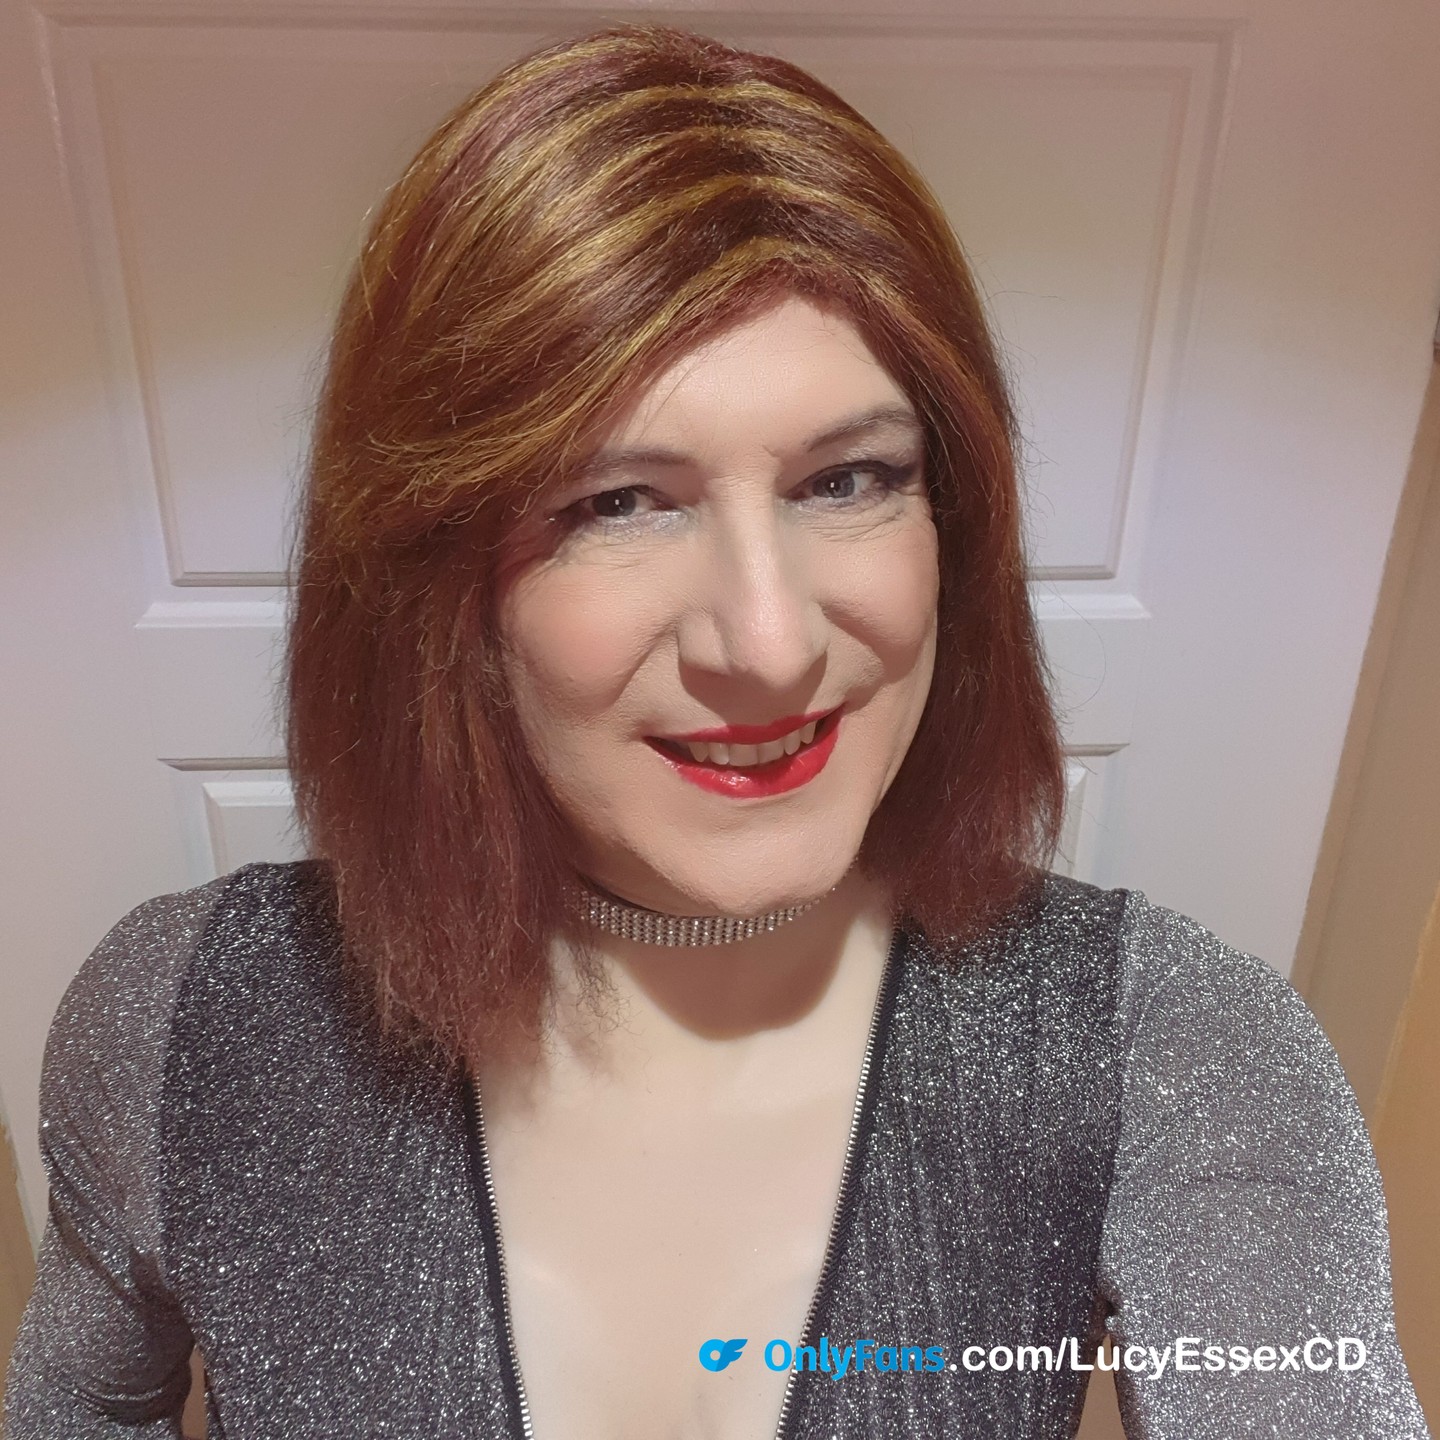 It's selfie time x

Check out my OnlyFans for more https://onlyfans.com/lucyessexcd

#tgirl #tgirleyecandy #tgirlsdoitbetter #tgirlselfie #tgirlselfies #tgirlsofinstagram #tgirlgoddesses #tgirlsarebeautiful #tgirldoitbetter #sexytgirl #crossdressing #crossdresseruk #crossdressers #crossdressed #lgbt #lgbtpride #lgbtq #trans #transisbeautiful #transpride #redhead #selfie